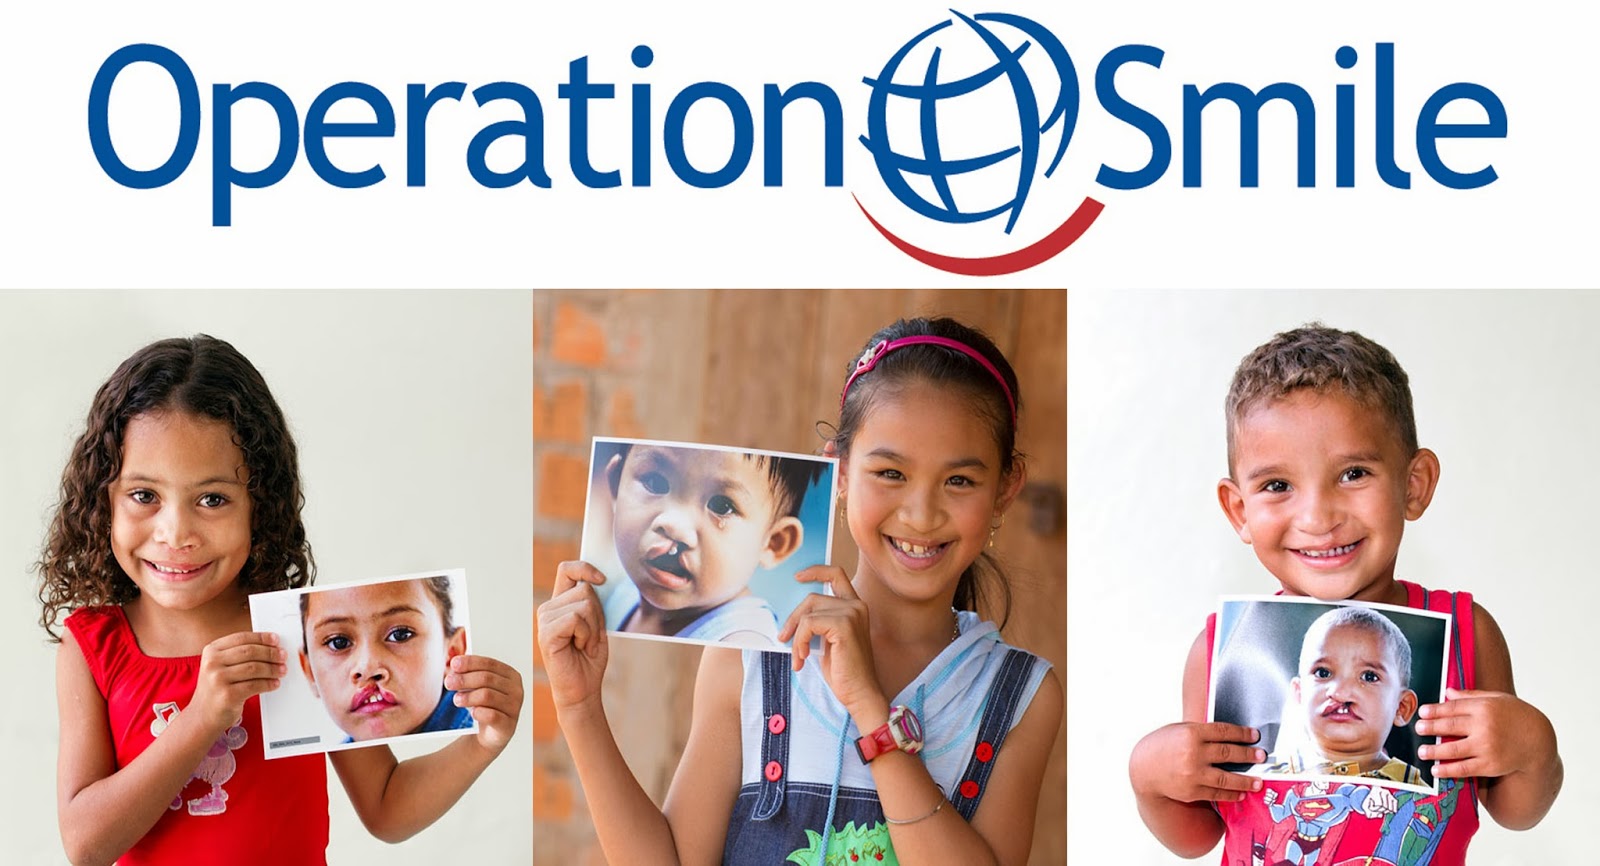 Superdrug pledges donation to Operation Smile charity